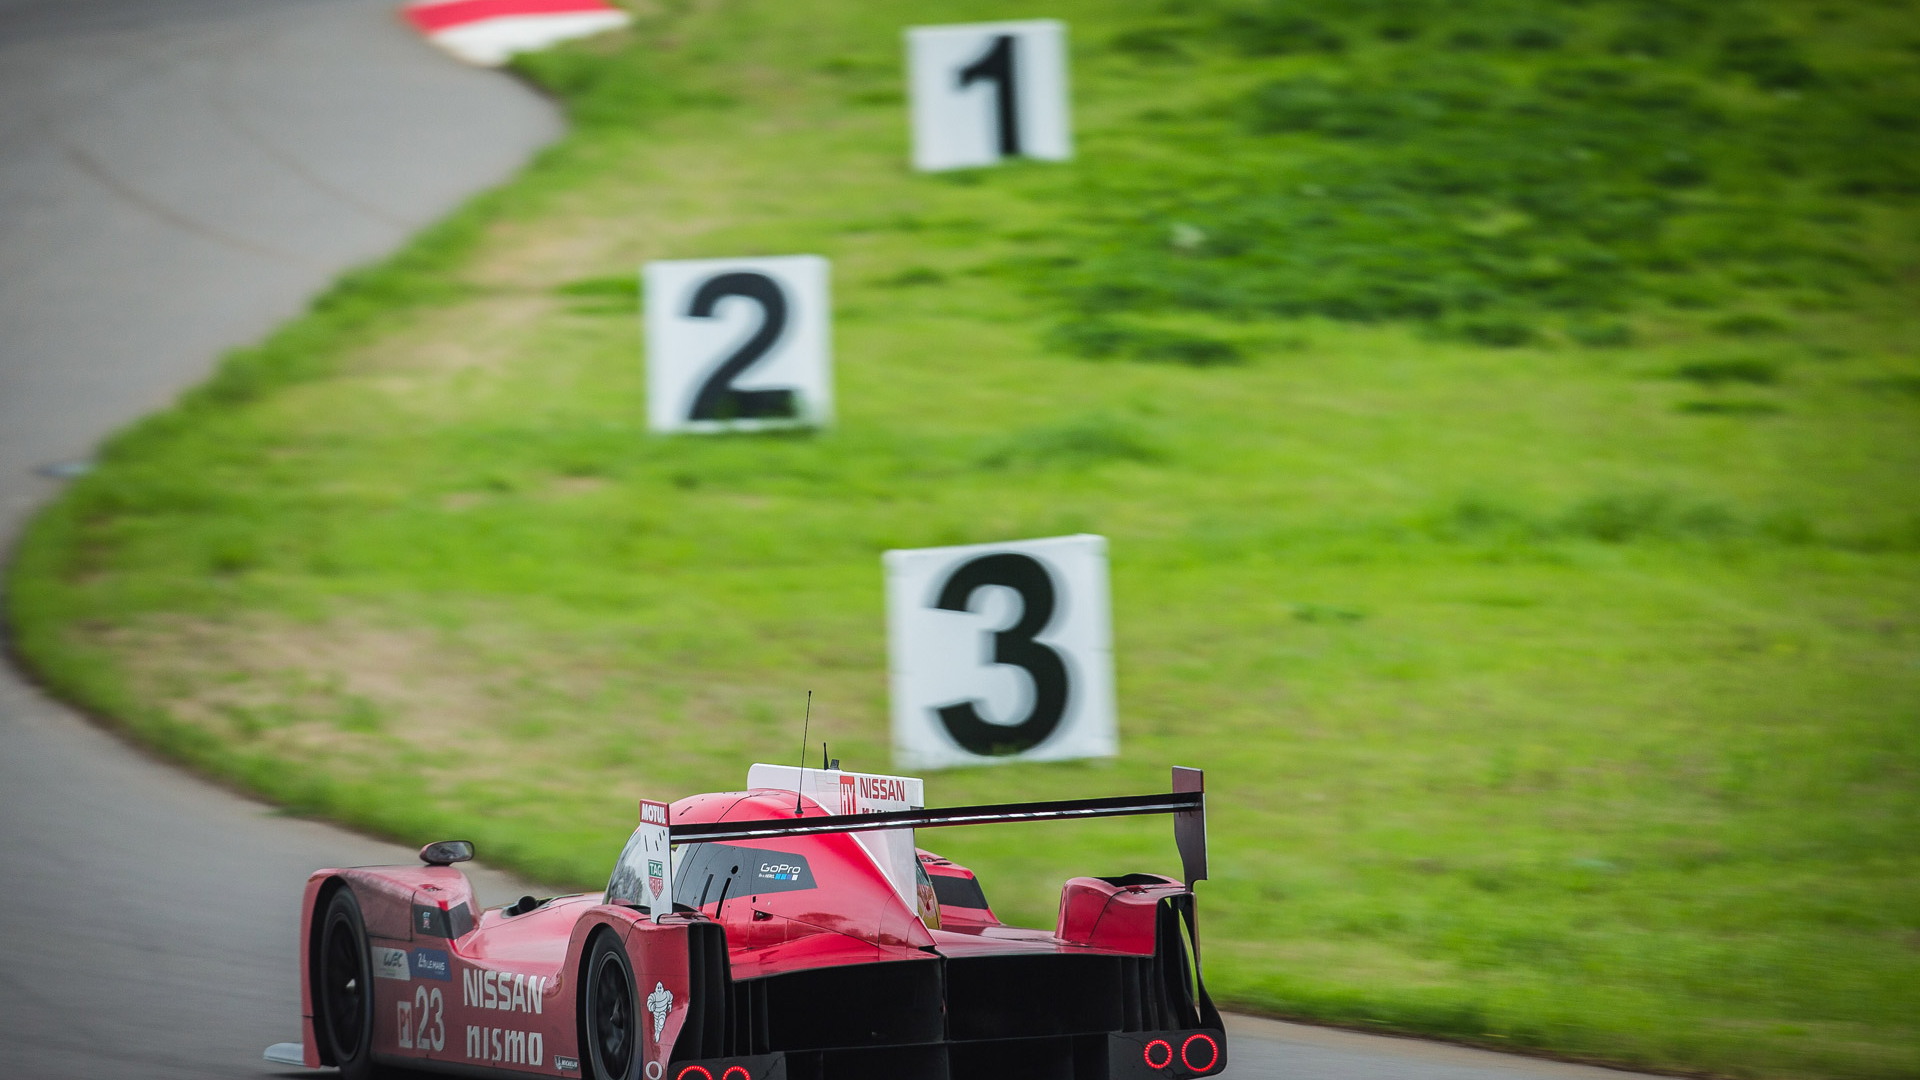 2015 Nissan GT-R LM NISMO LMP1 testing at NCM Motorsports Park in Bowling Green, Kentucky